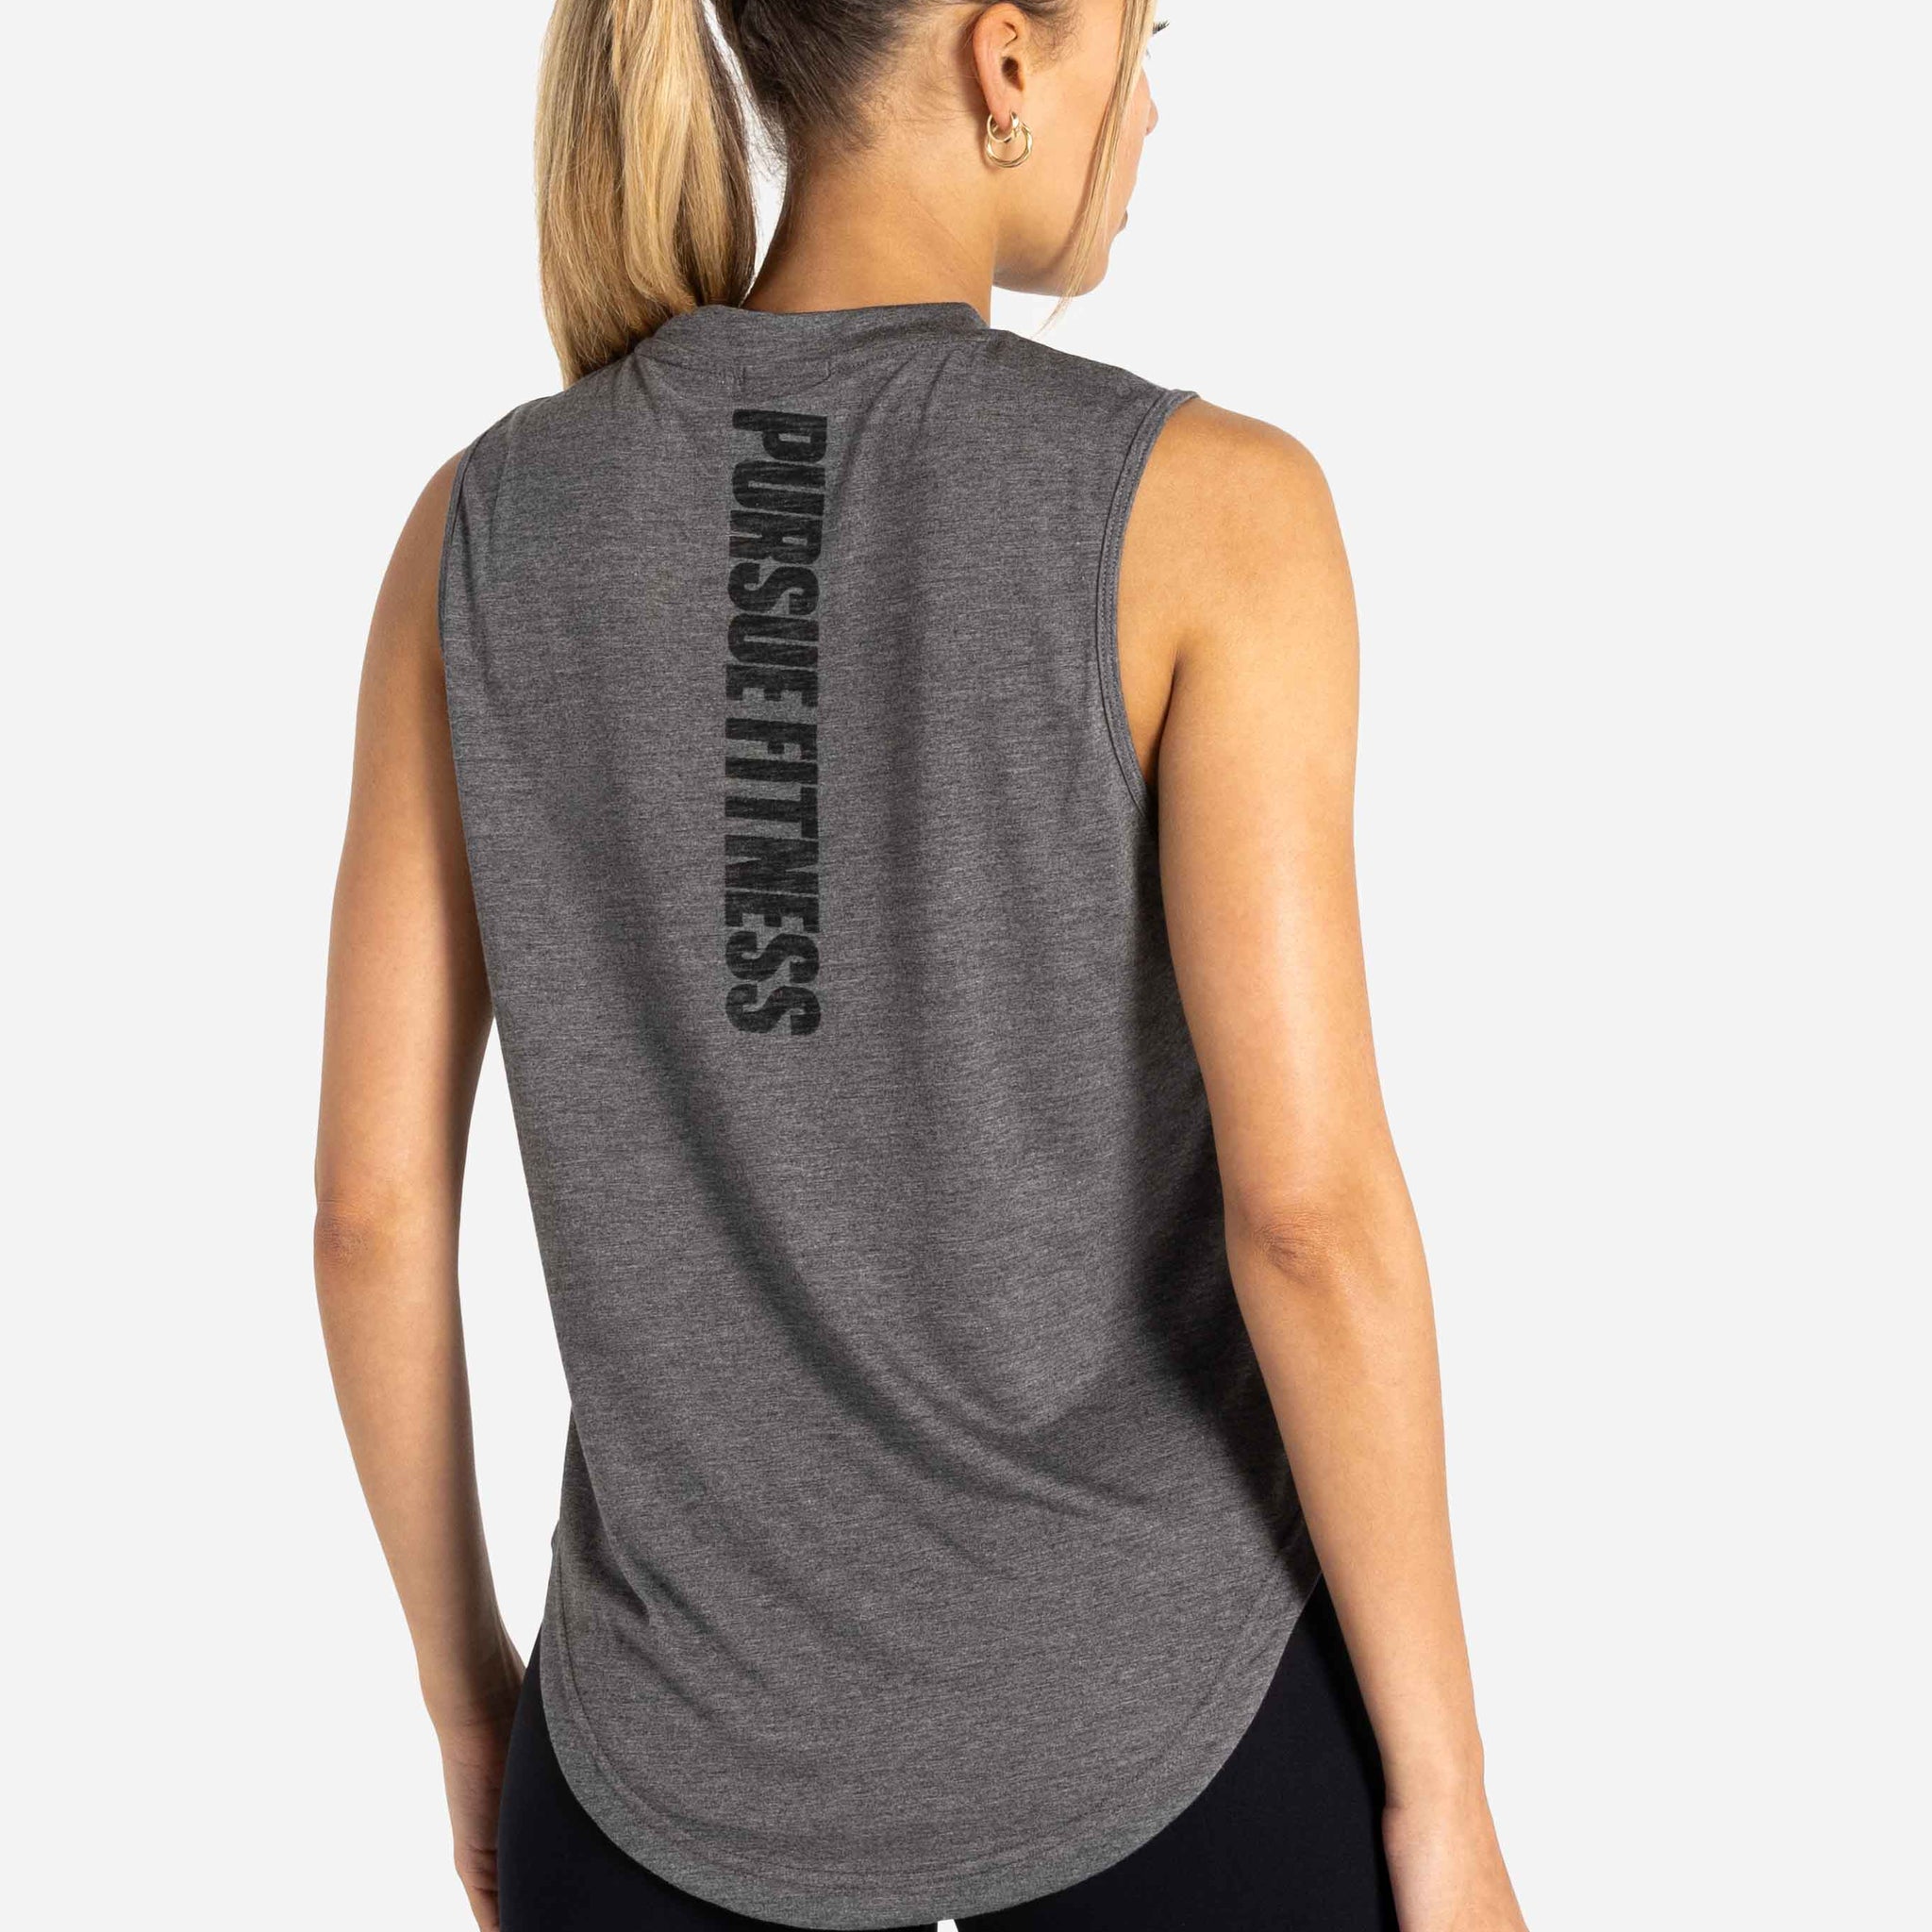 Oversized Graphic Tank / Charcoal Black Pursue Fitness 1